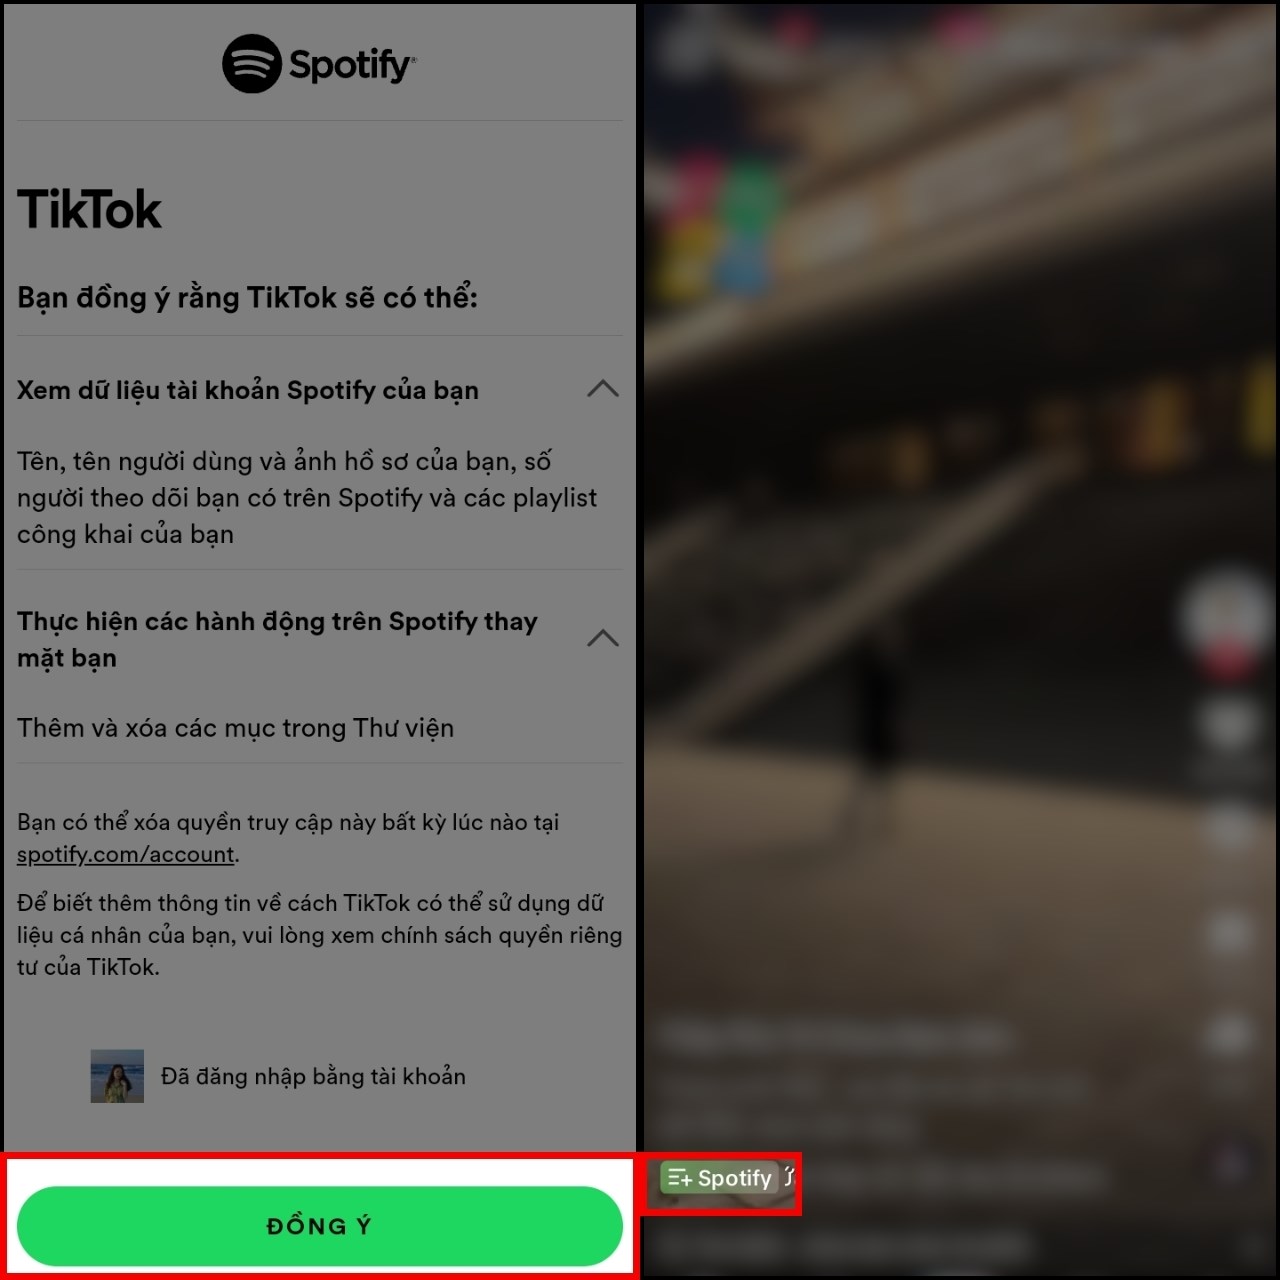 Enable a simple way to save TikTok songs to Spotify that you may not know